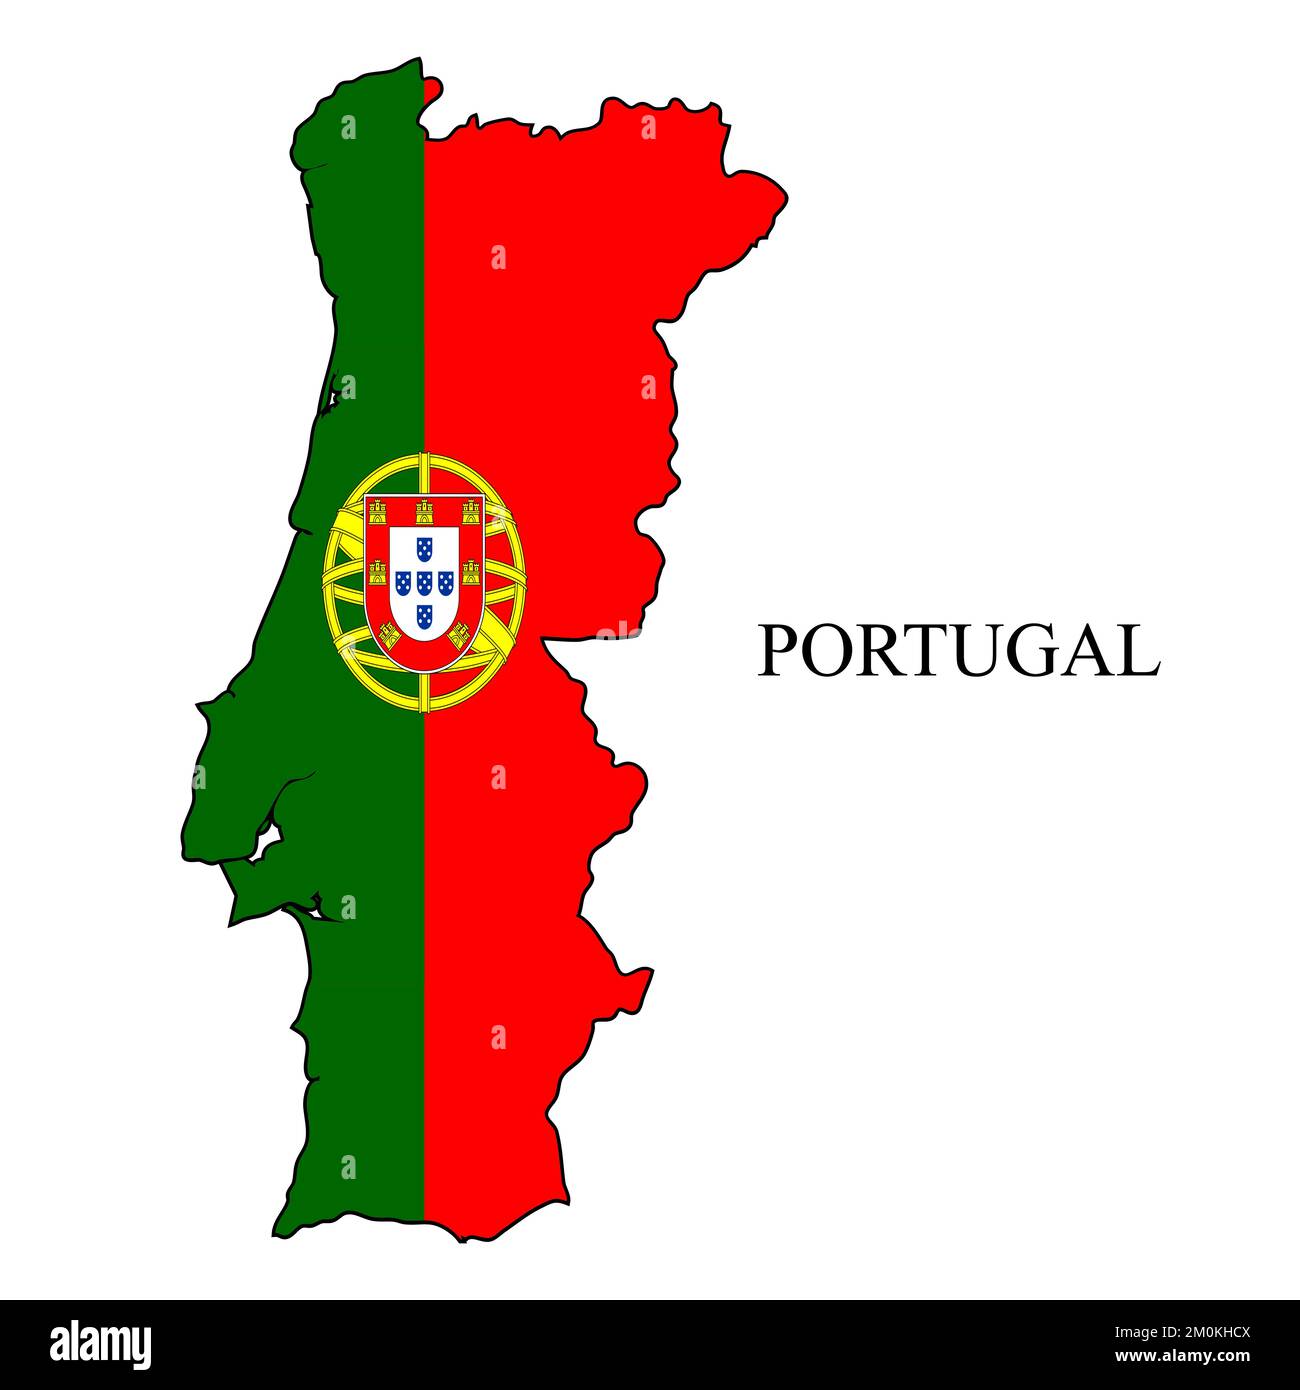 Portugal map vector illustration. Global economy. Famous country. Southern Europe. Europe. Stock Vector